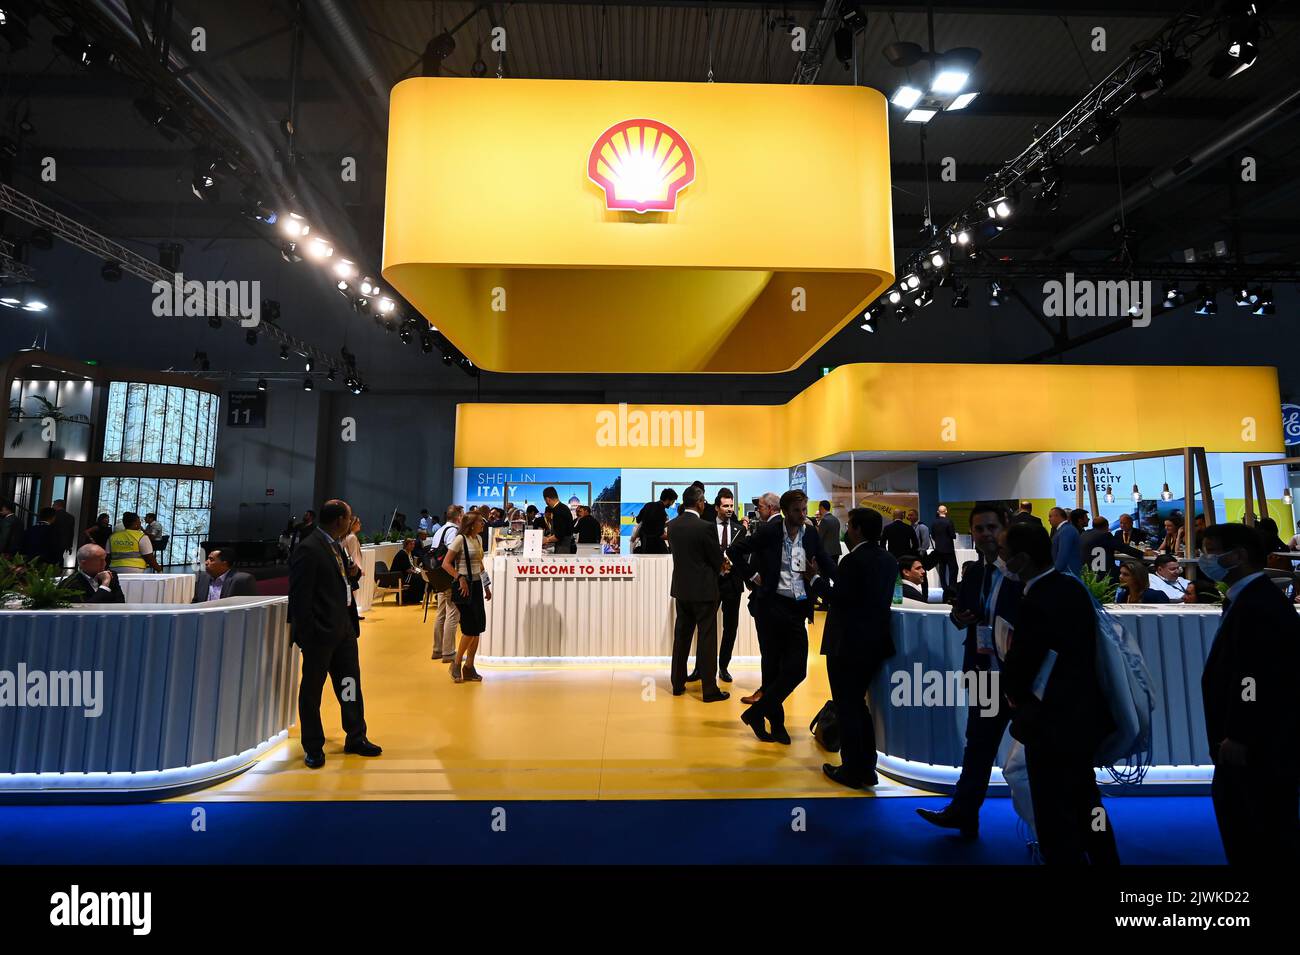 MILAN, ITALY - SEPTEMBER 6, 2022: a view of the Shell stand during Gastech 2022 trade show event in Milan Fair. Visitors and people in the hall walk through exhibitors stands and exhibit booths. Stock Photo